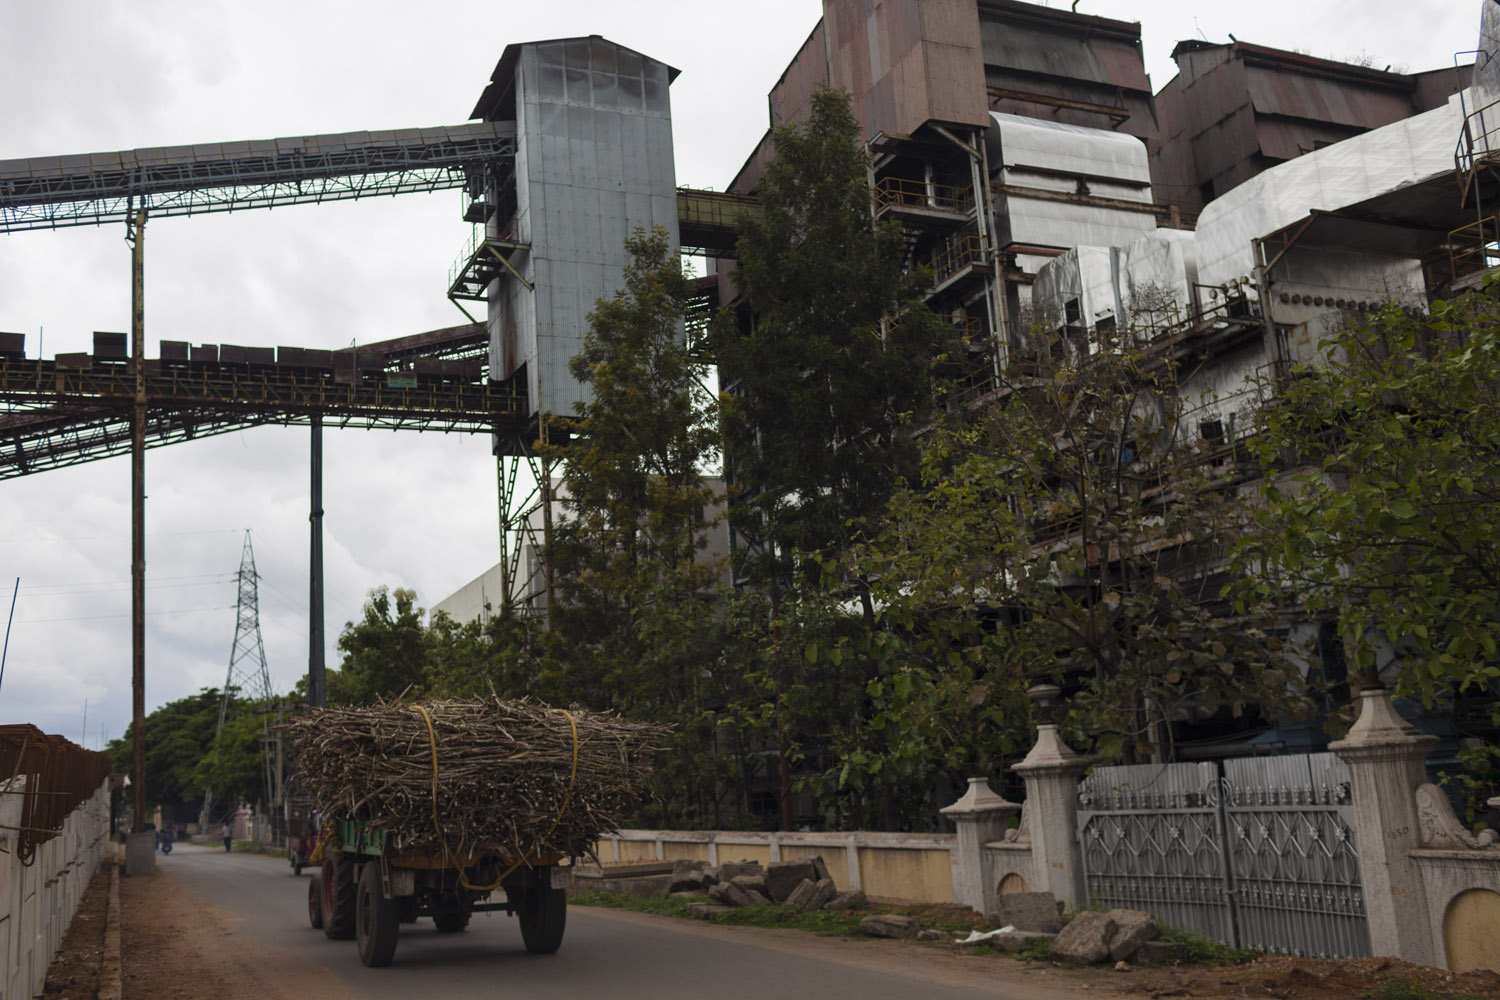 The “My Sugar” factory in Mandya. Sugar factories are owned by some of the most important businessmen in the state, and are the largest buyers of sugarcane. They also have a habit of taking up to a year to pay farmers.